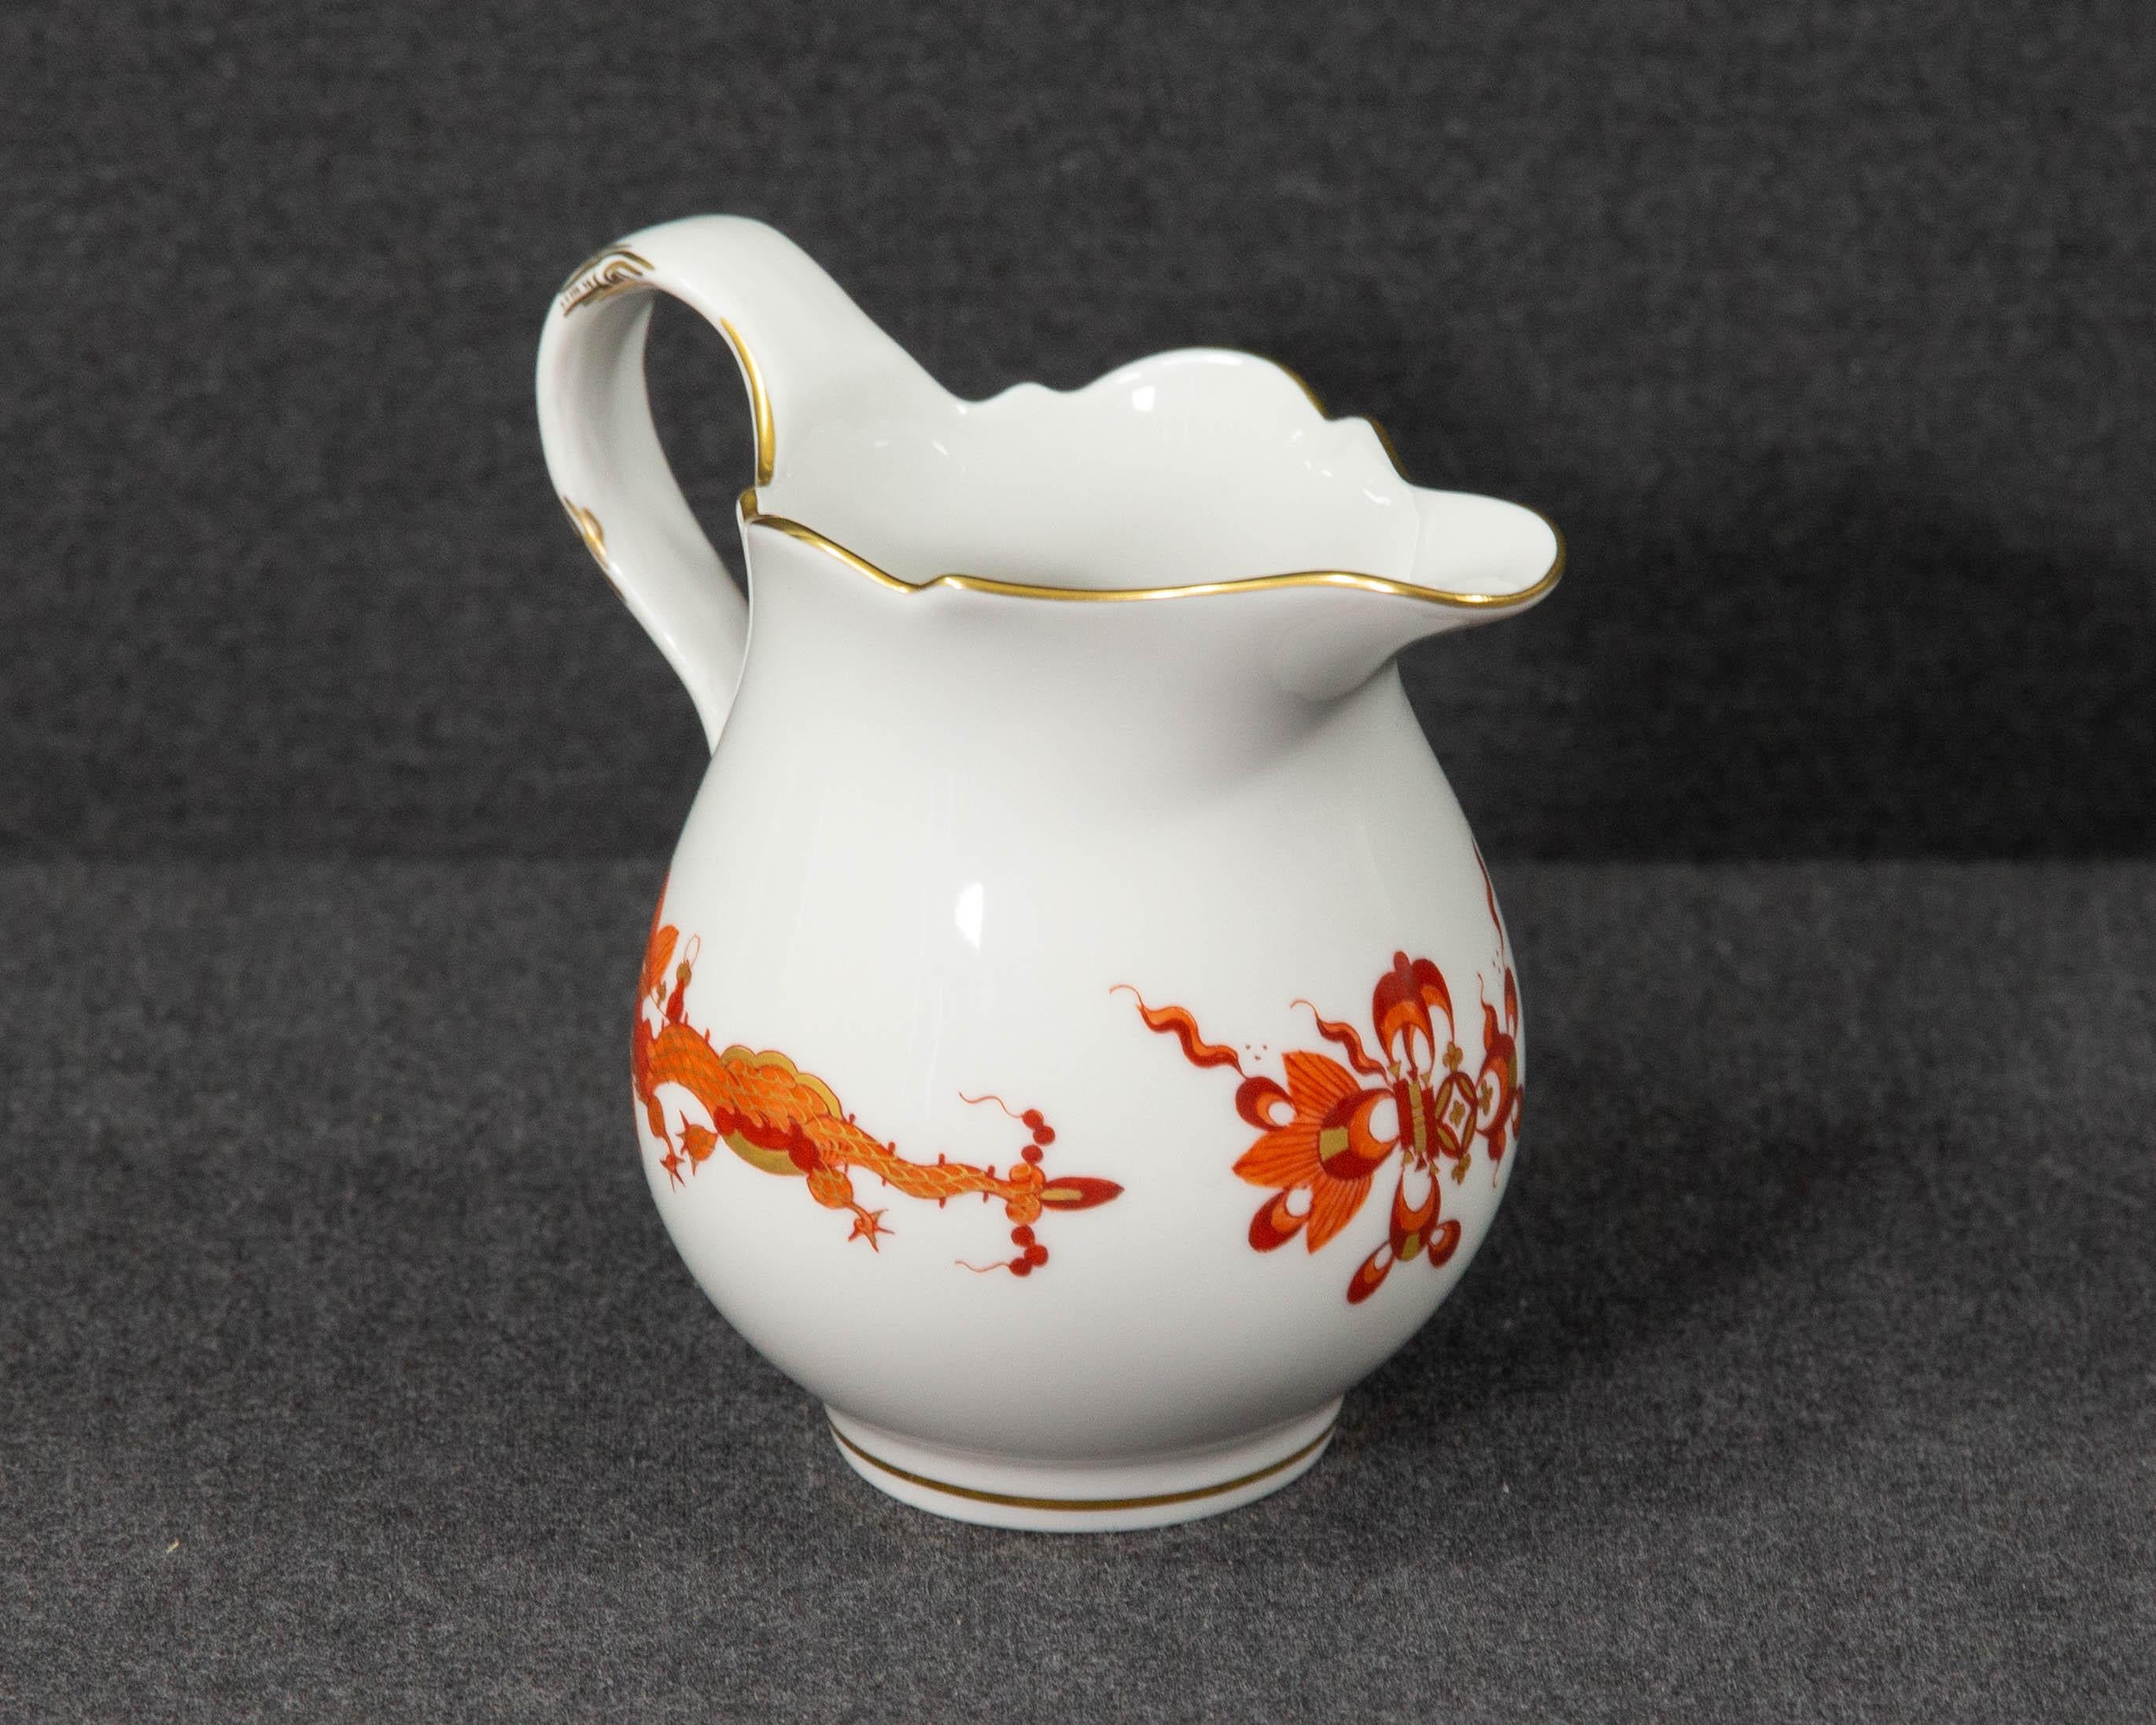 A Meissen red dragon milk jug.

The milk jug or creamer was made by Meissen and has been decorated with the 'Court Dragon' pattern in red. The item was made in the second half of the 20th century.

The item is made of white porcelain and is hand